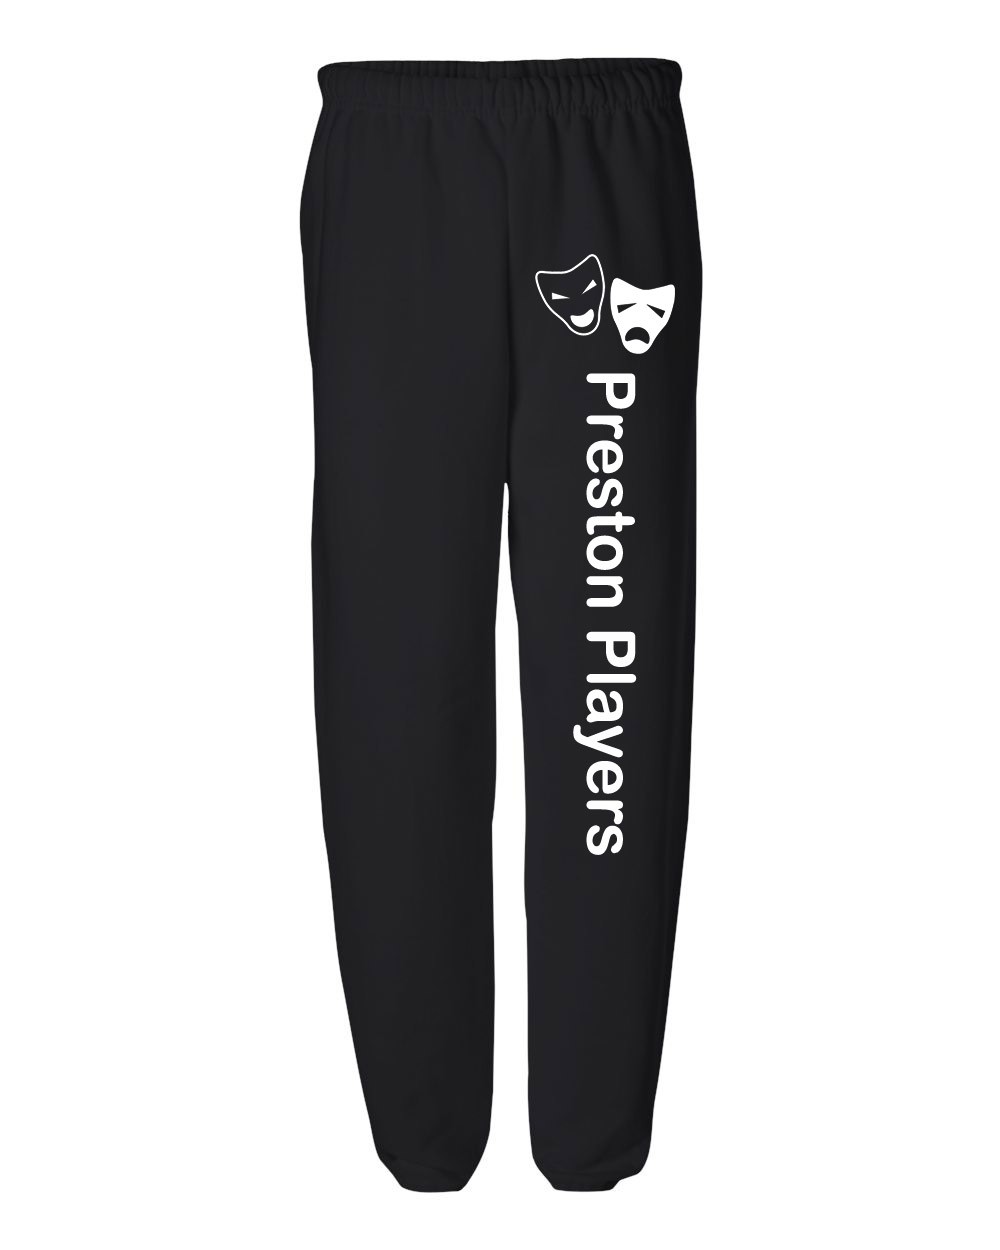 PHS Players Sweatpants w/ Drama Logo - Please Allow 2-3 Weeks for Delivery